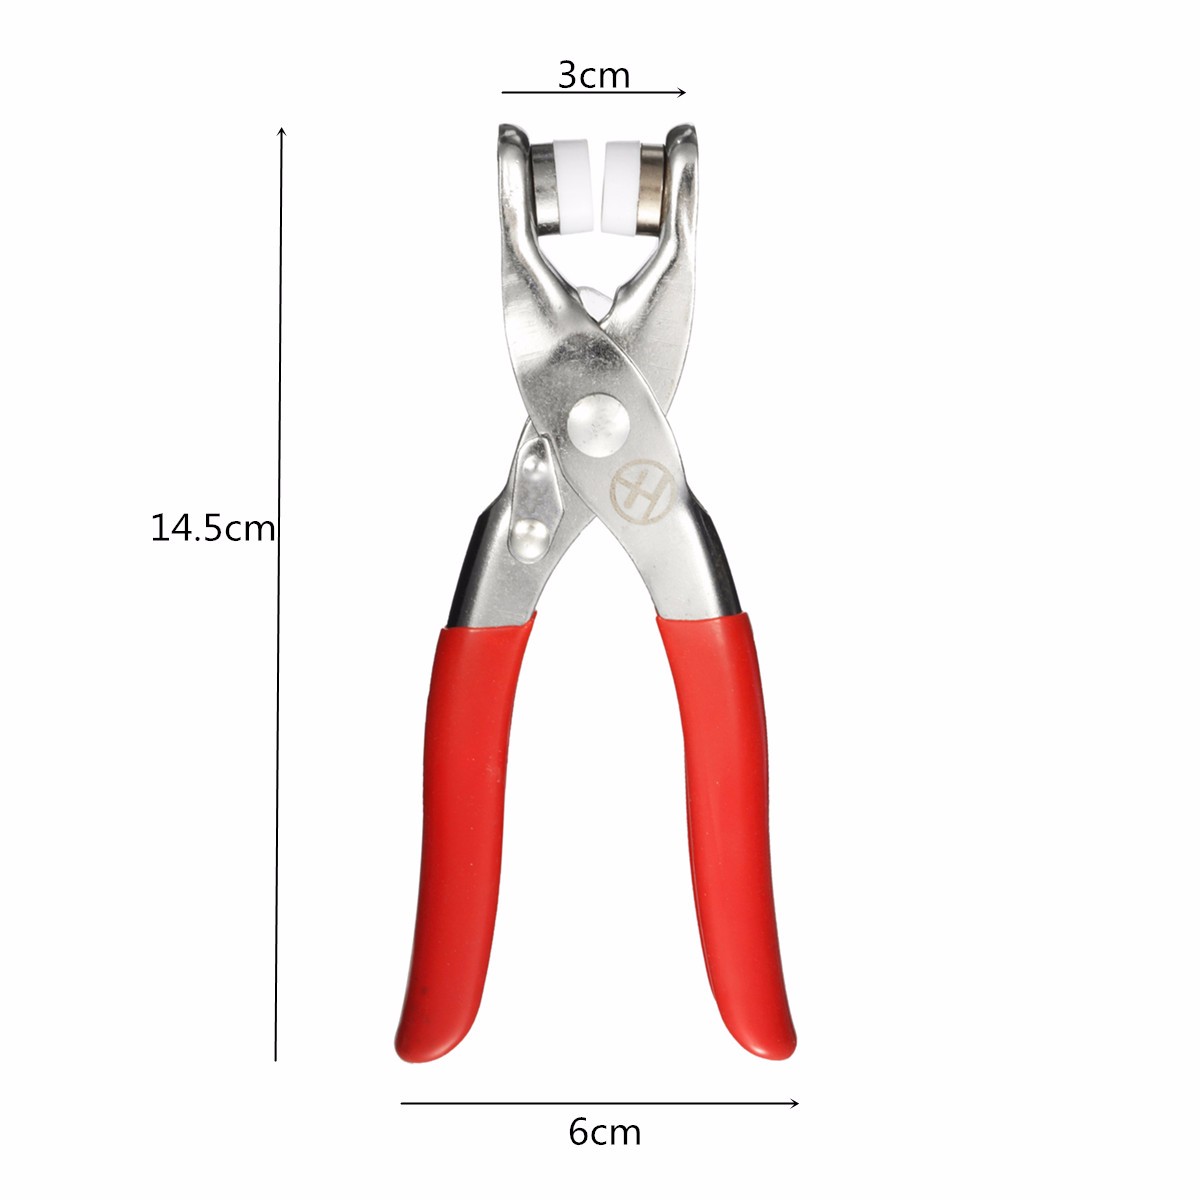 Fastener-Snap-Pliers-Camp-Craft-Tool-Sewing-Craft-with-110-Kits-Set-Press-Studs-1071743